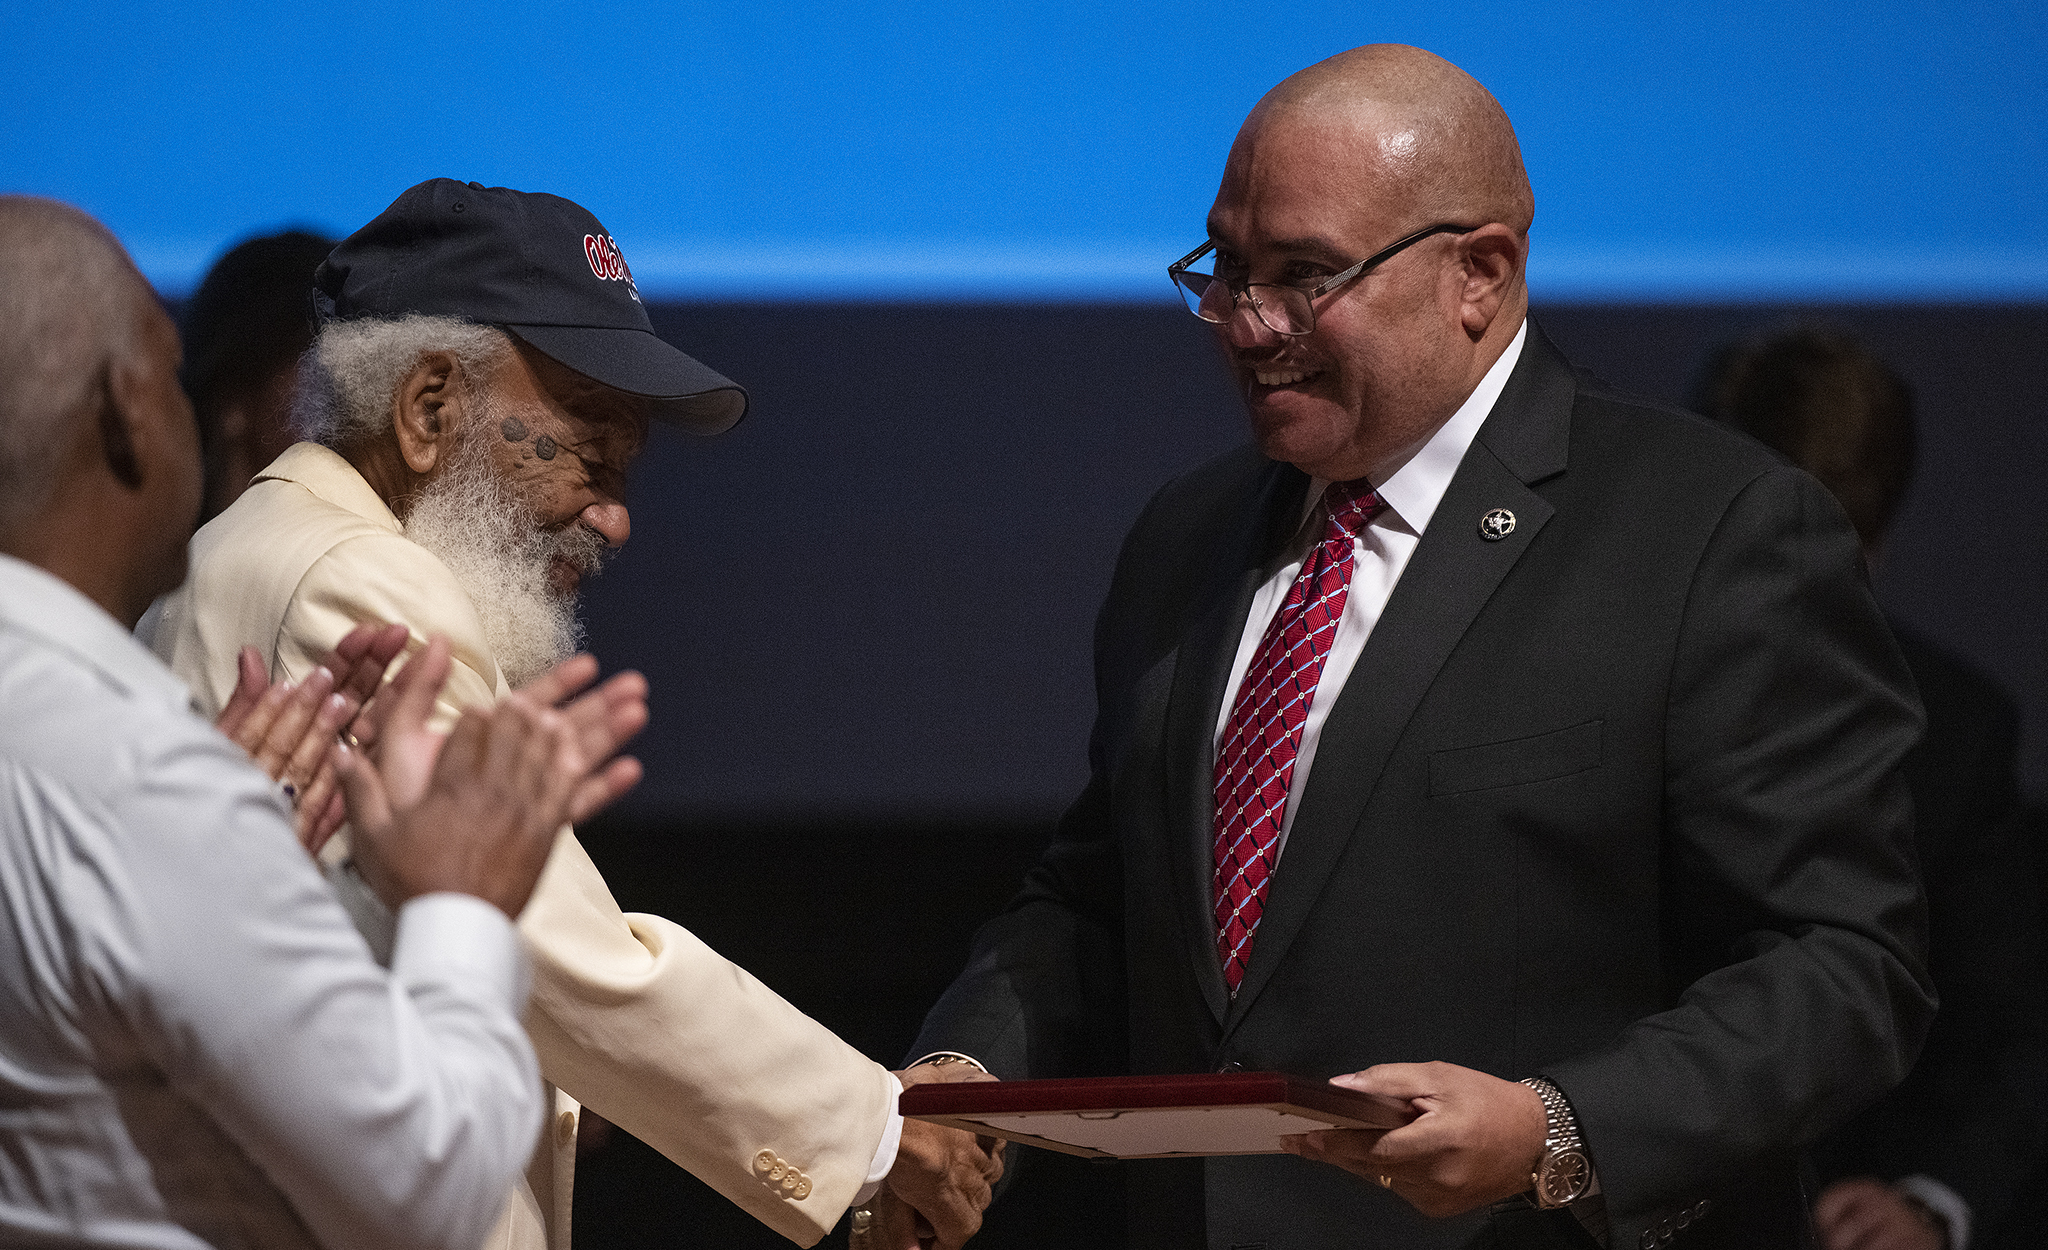 Ronald L. Davis (right), director of the U.S. Marshals Service, presents James Meredith with a plaque honoring the civil rights leader as an honorary deputy. Photo by Thomas Graning/Ole Miss Digital Imaging Services